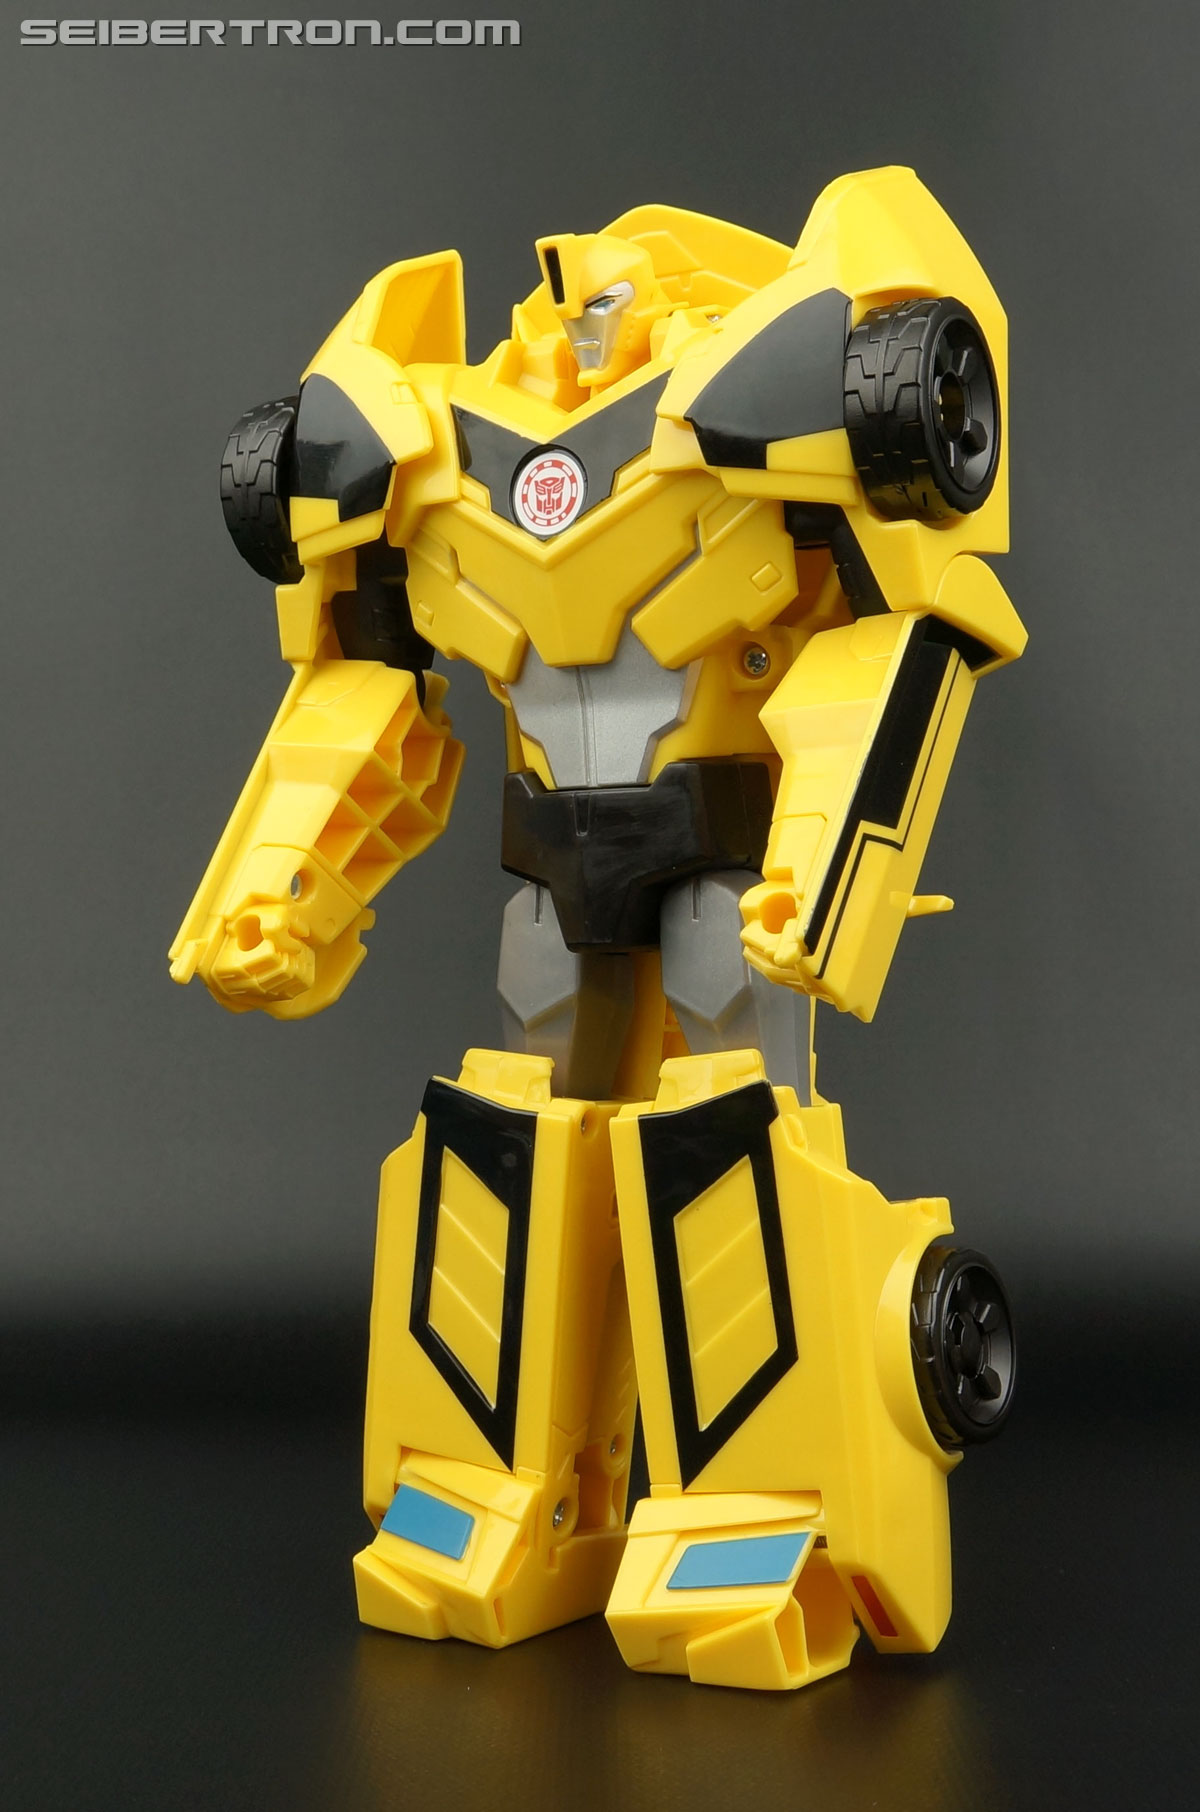 Transformers: Robots In Disguise Bumblebee (Image #53 of 71)